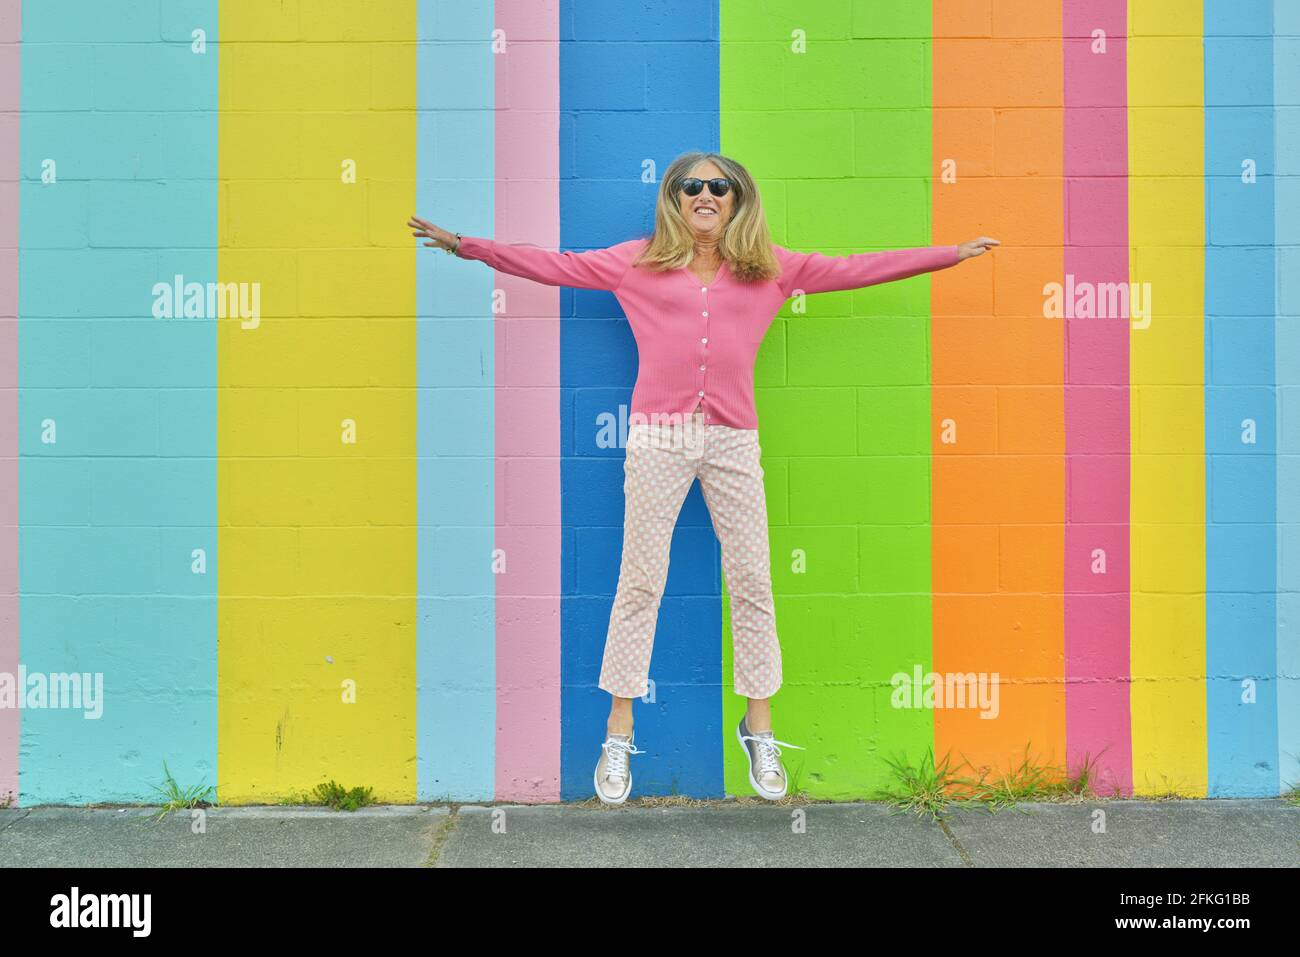 Attractive senior woman jumping  against brightly colored striped wall outdoors Stock Photo